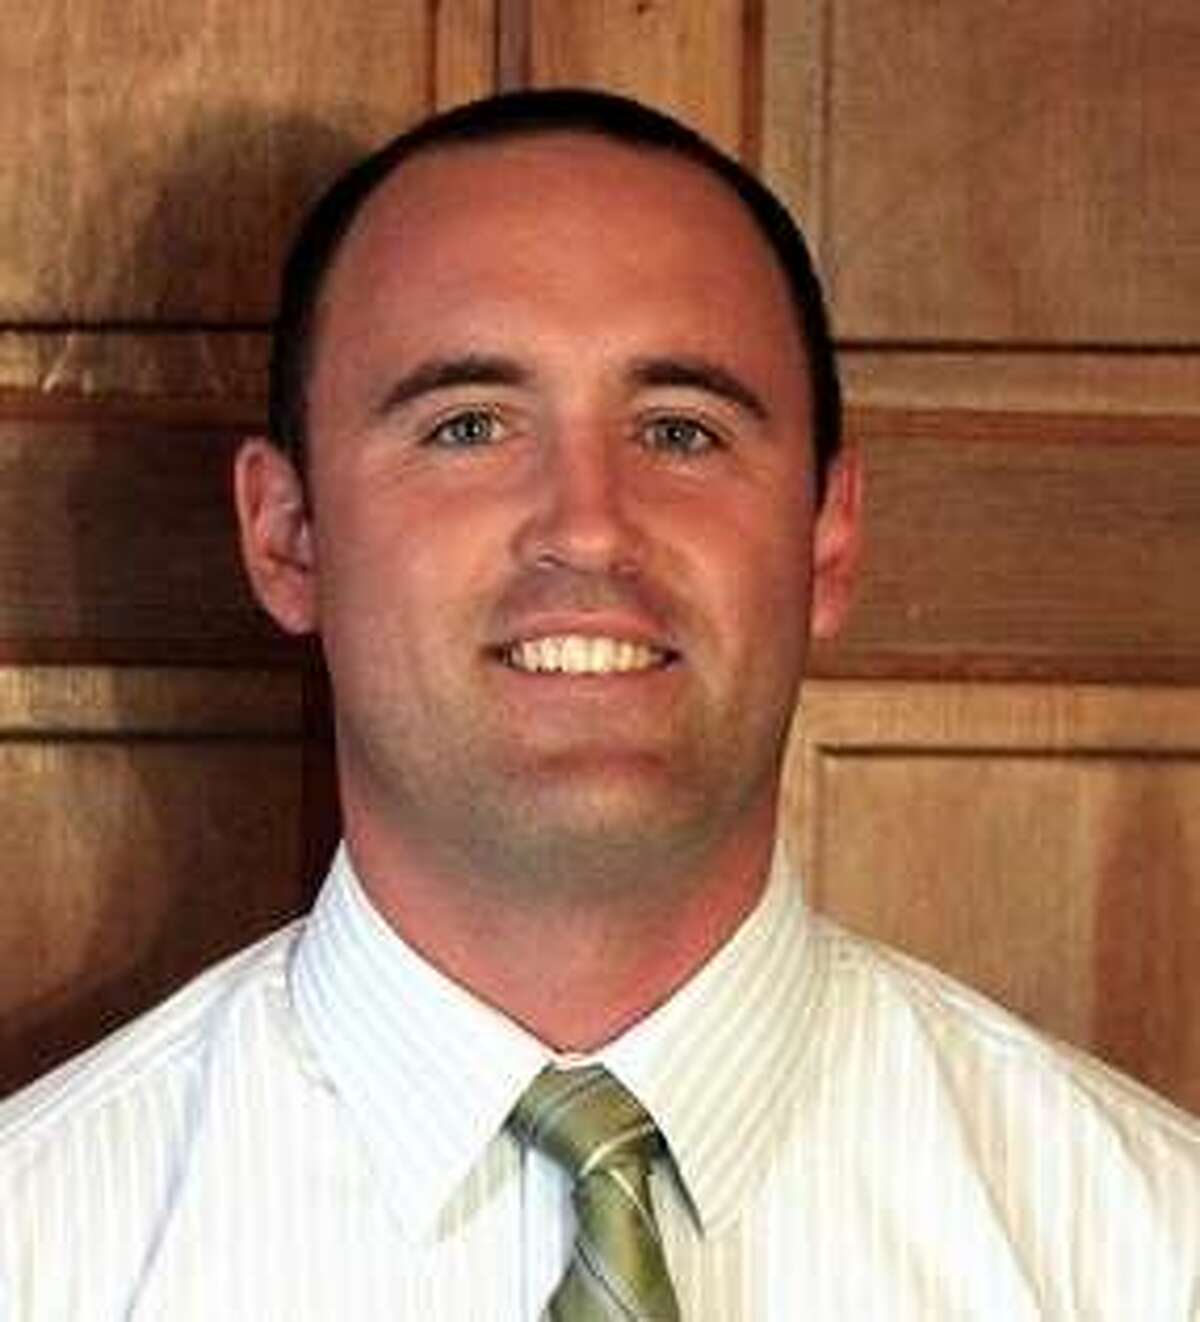 Brendan Case has been named the new athletic director at Westhill High School, according to the school's principal.